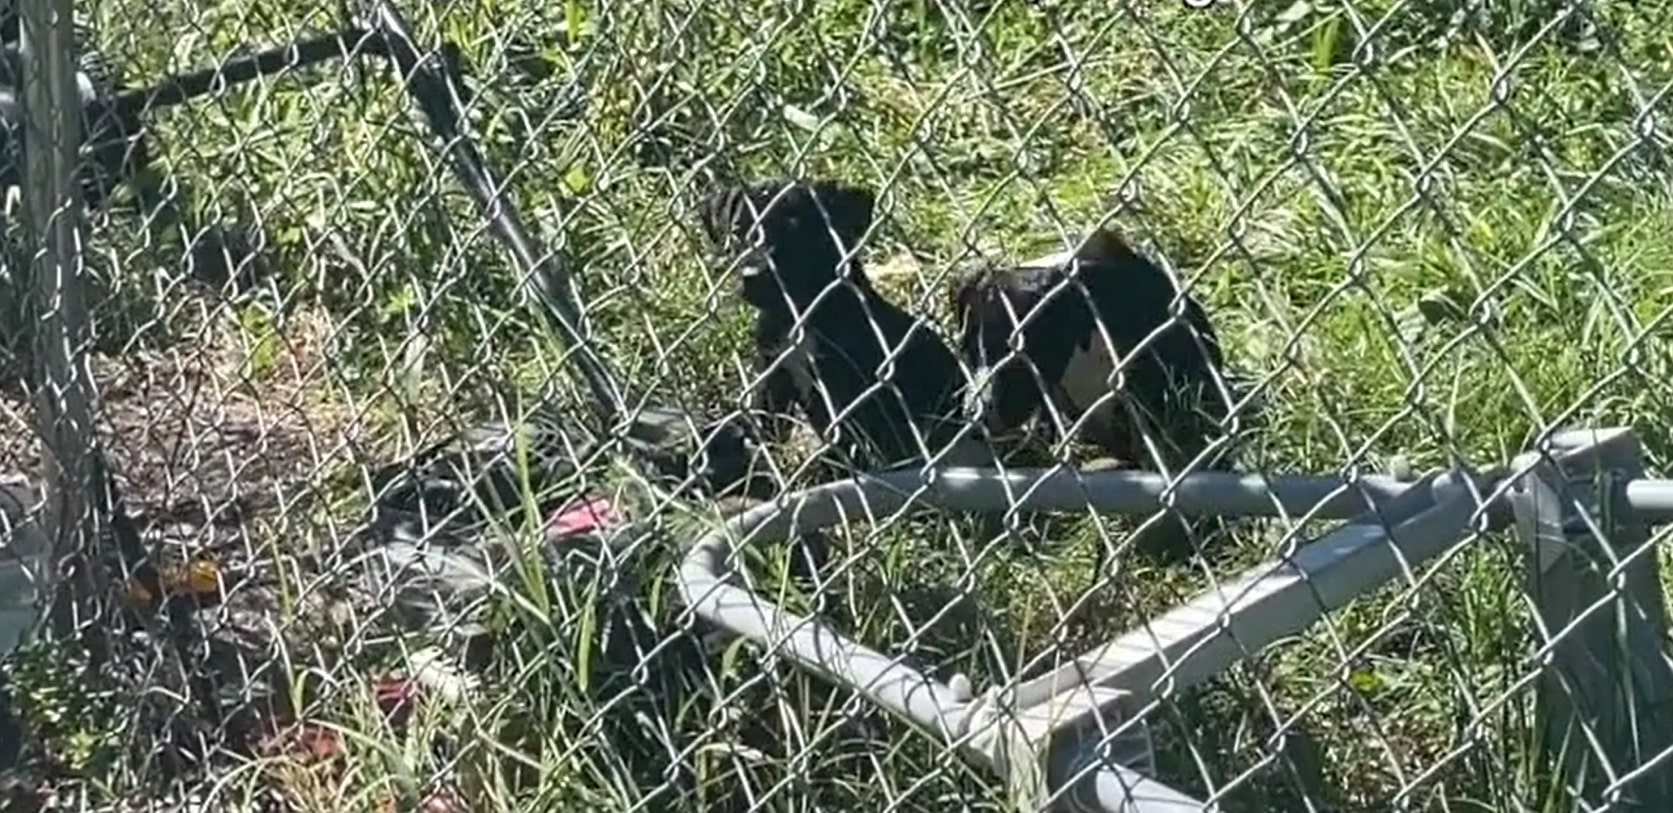 two abandoned dogs behind the fence